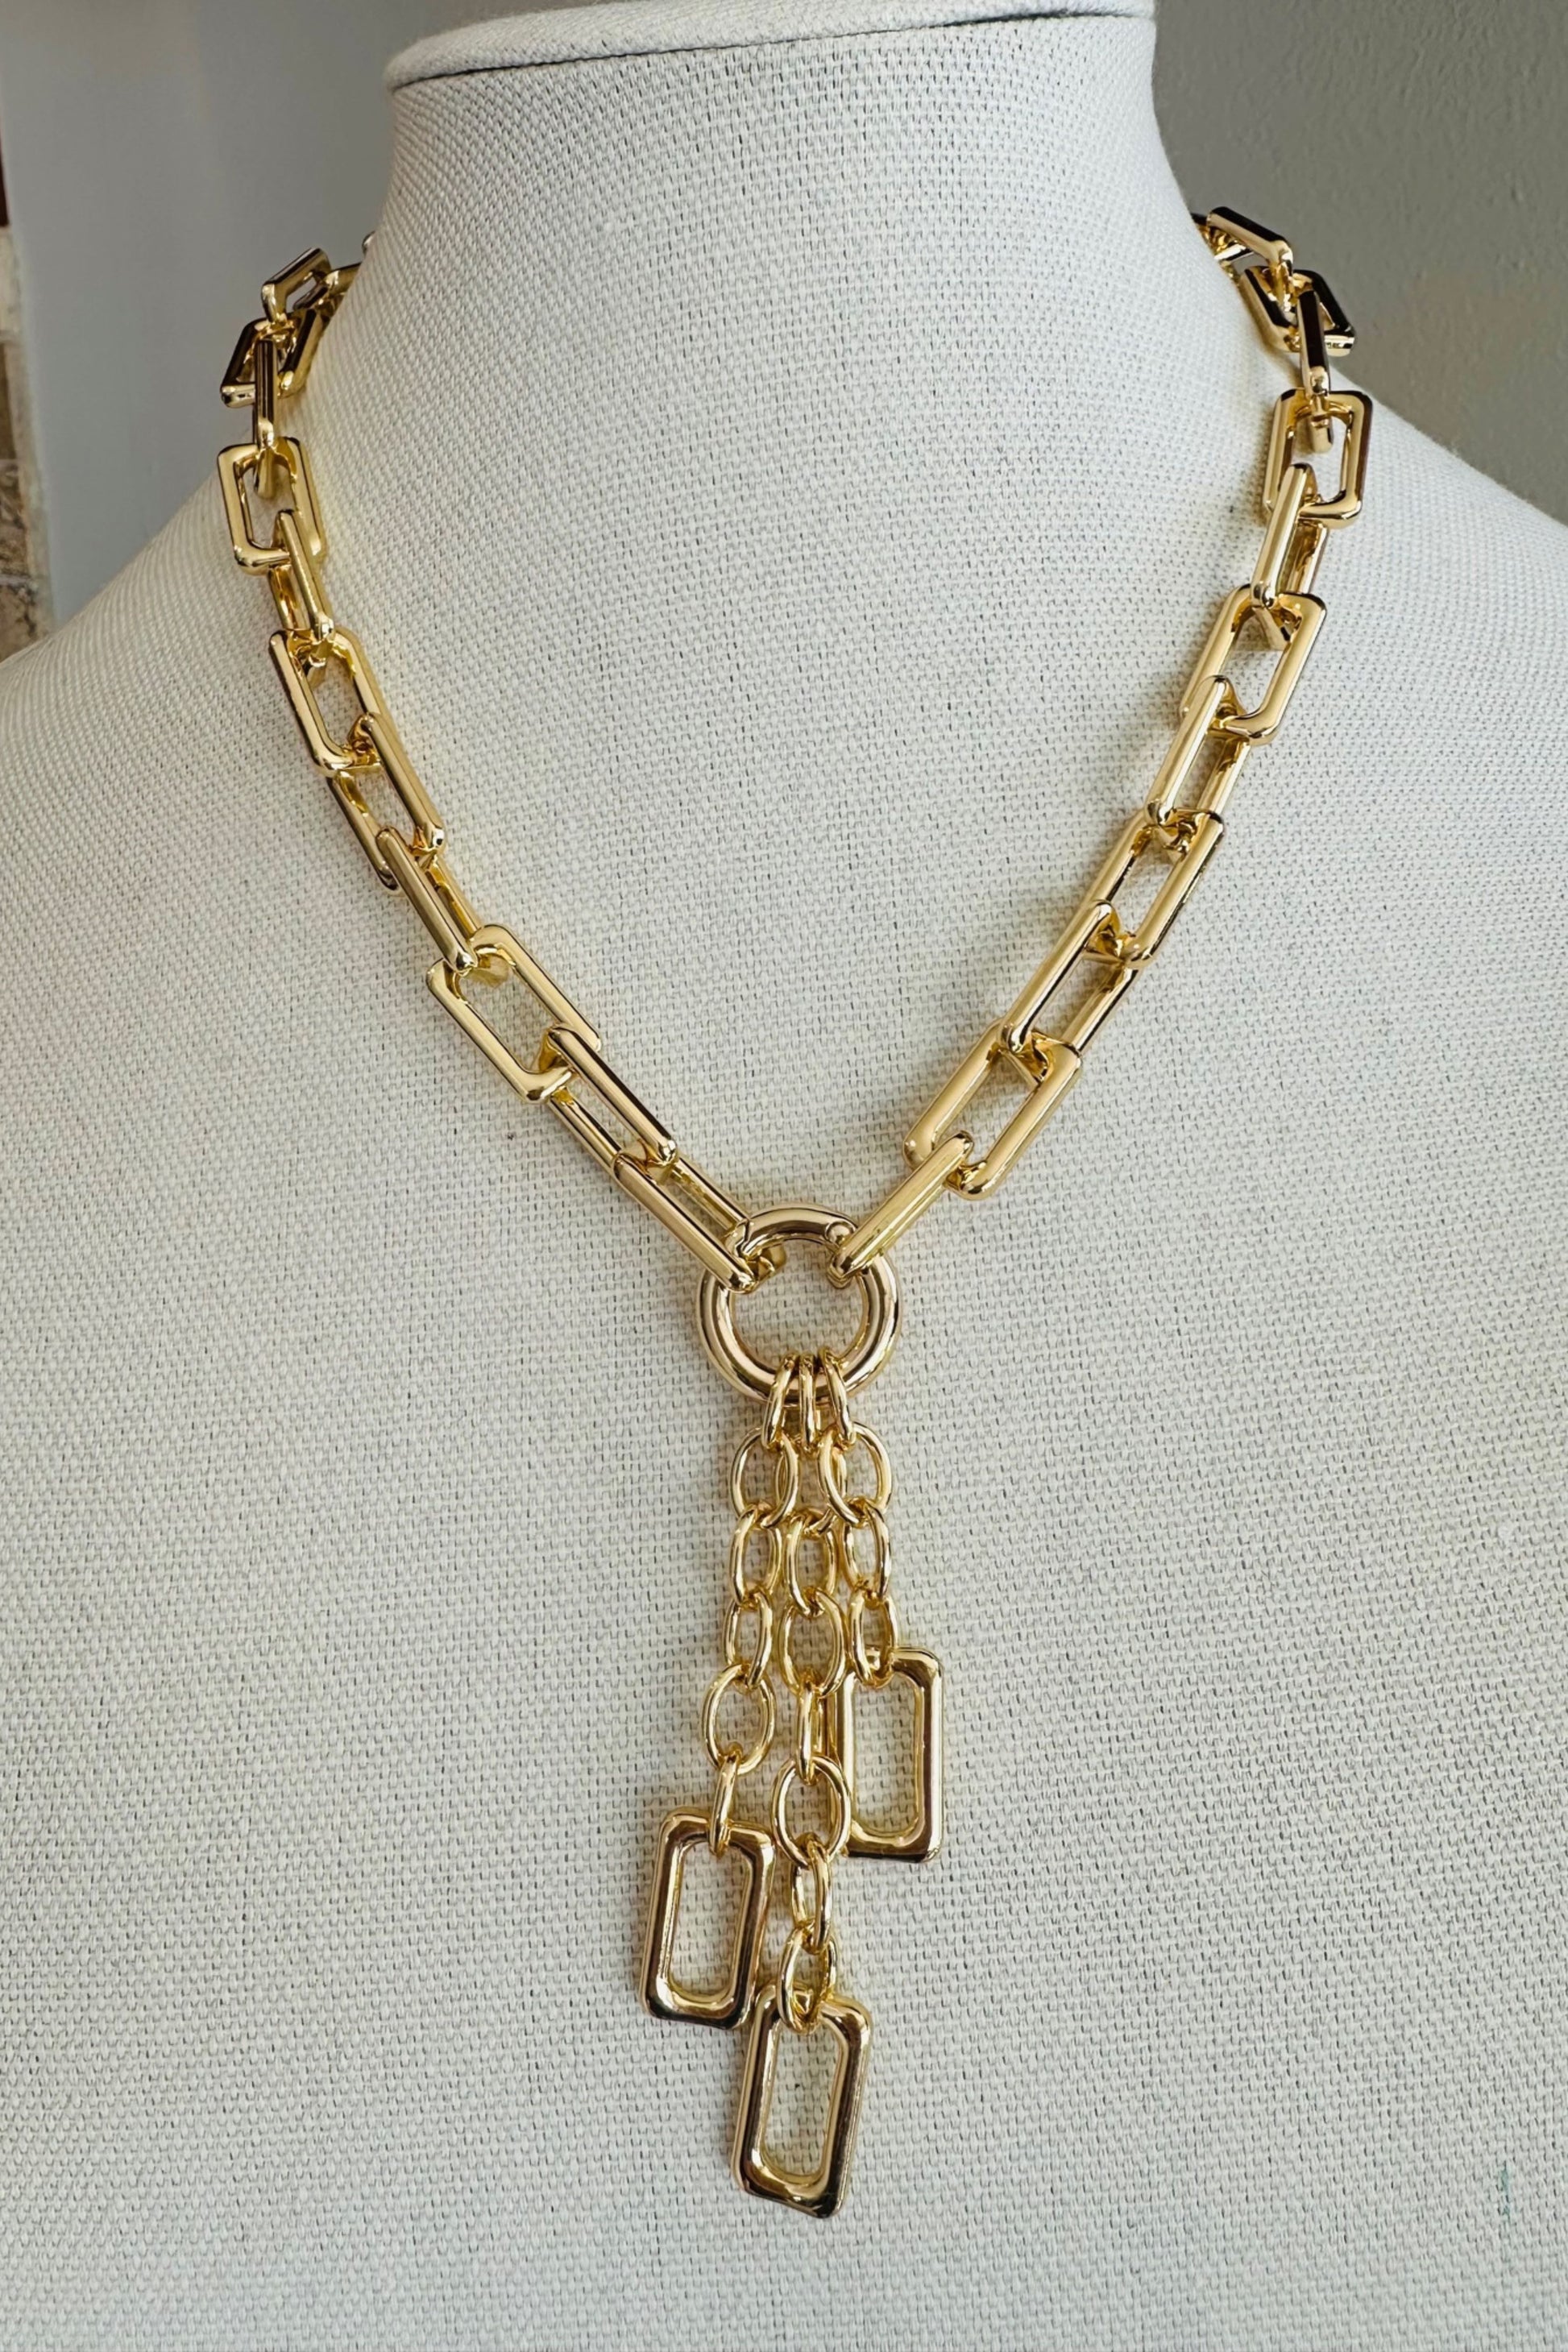 Women's Link Chain Necklace